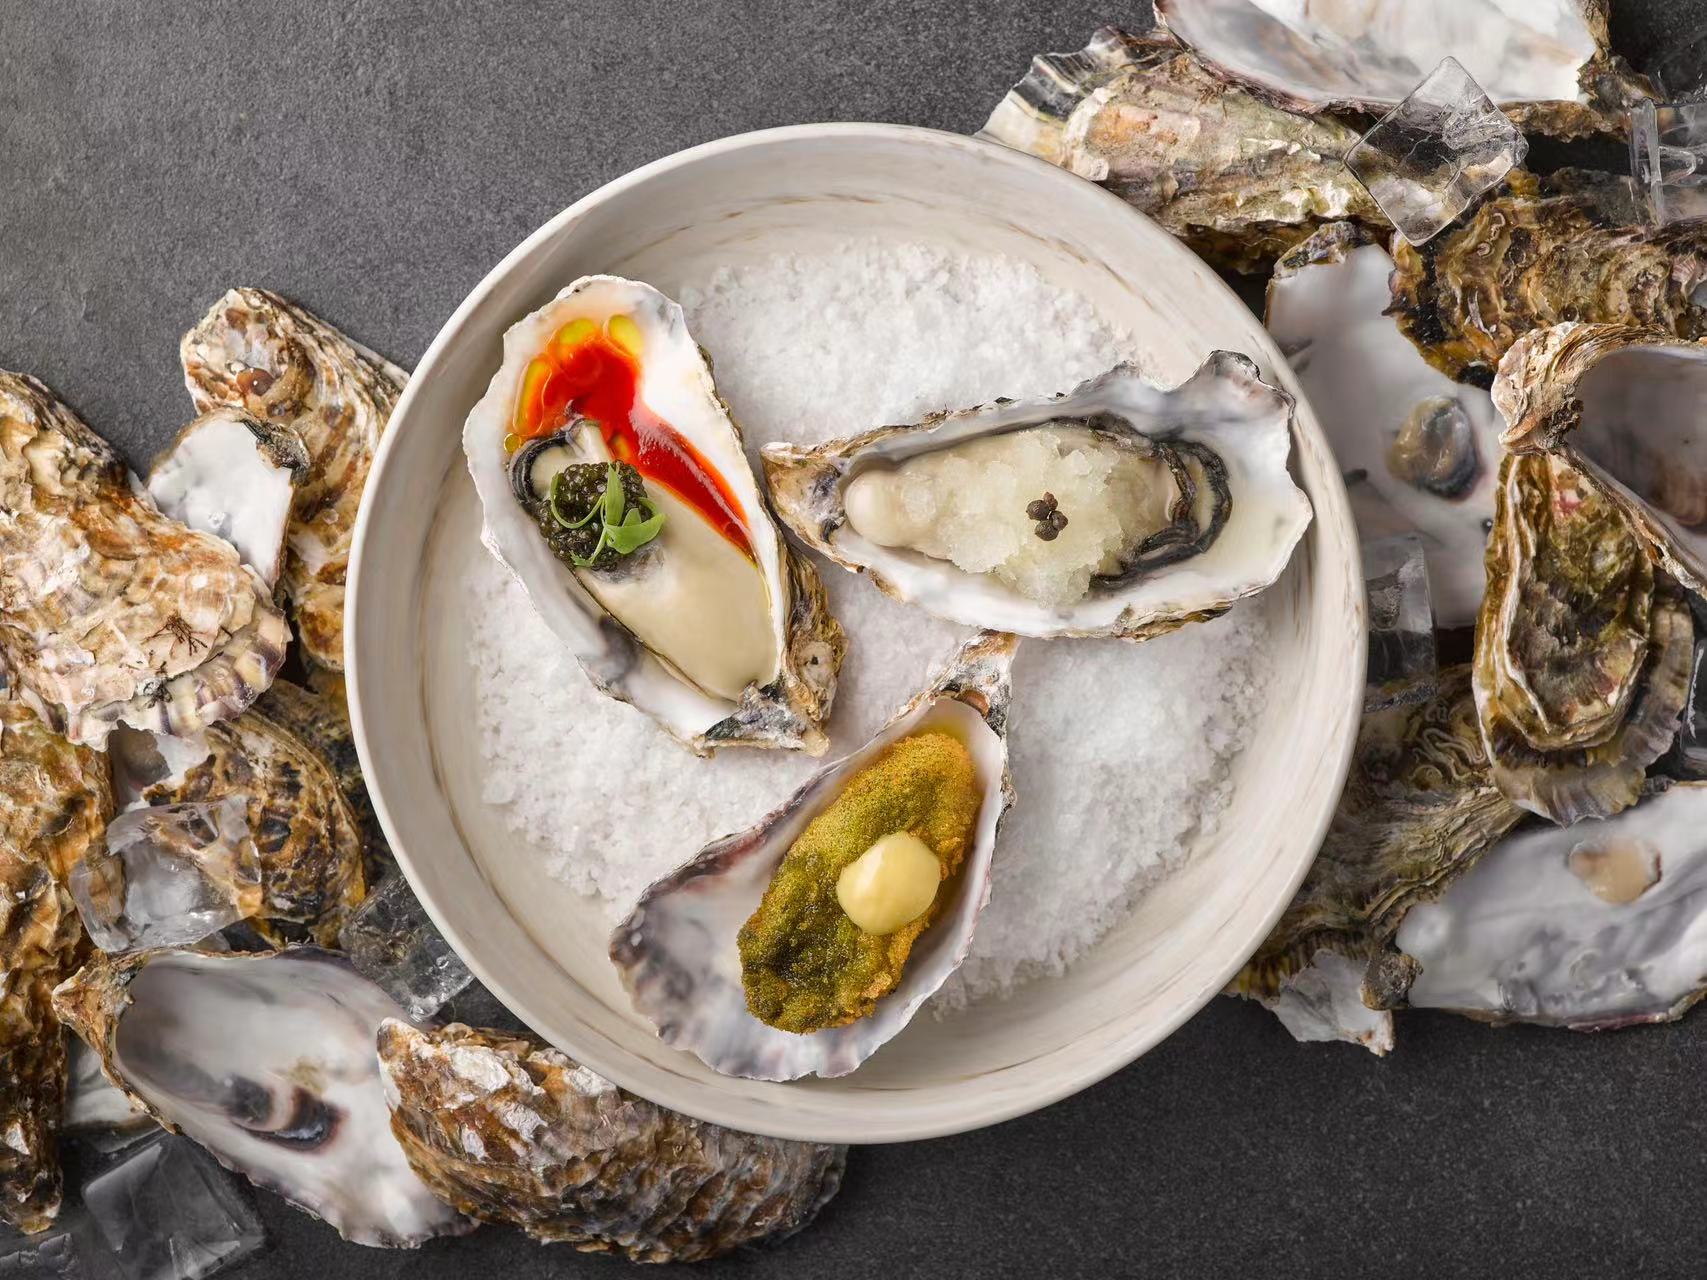 Michelin Star Chef Steve Lee's PIИK OYSTER Popup